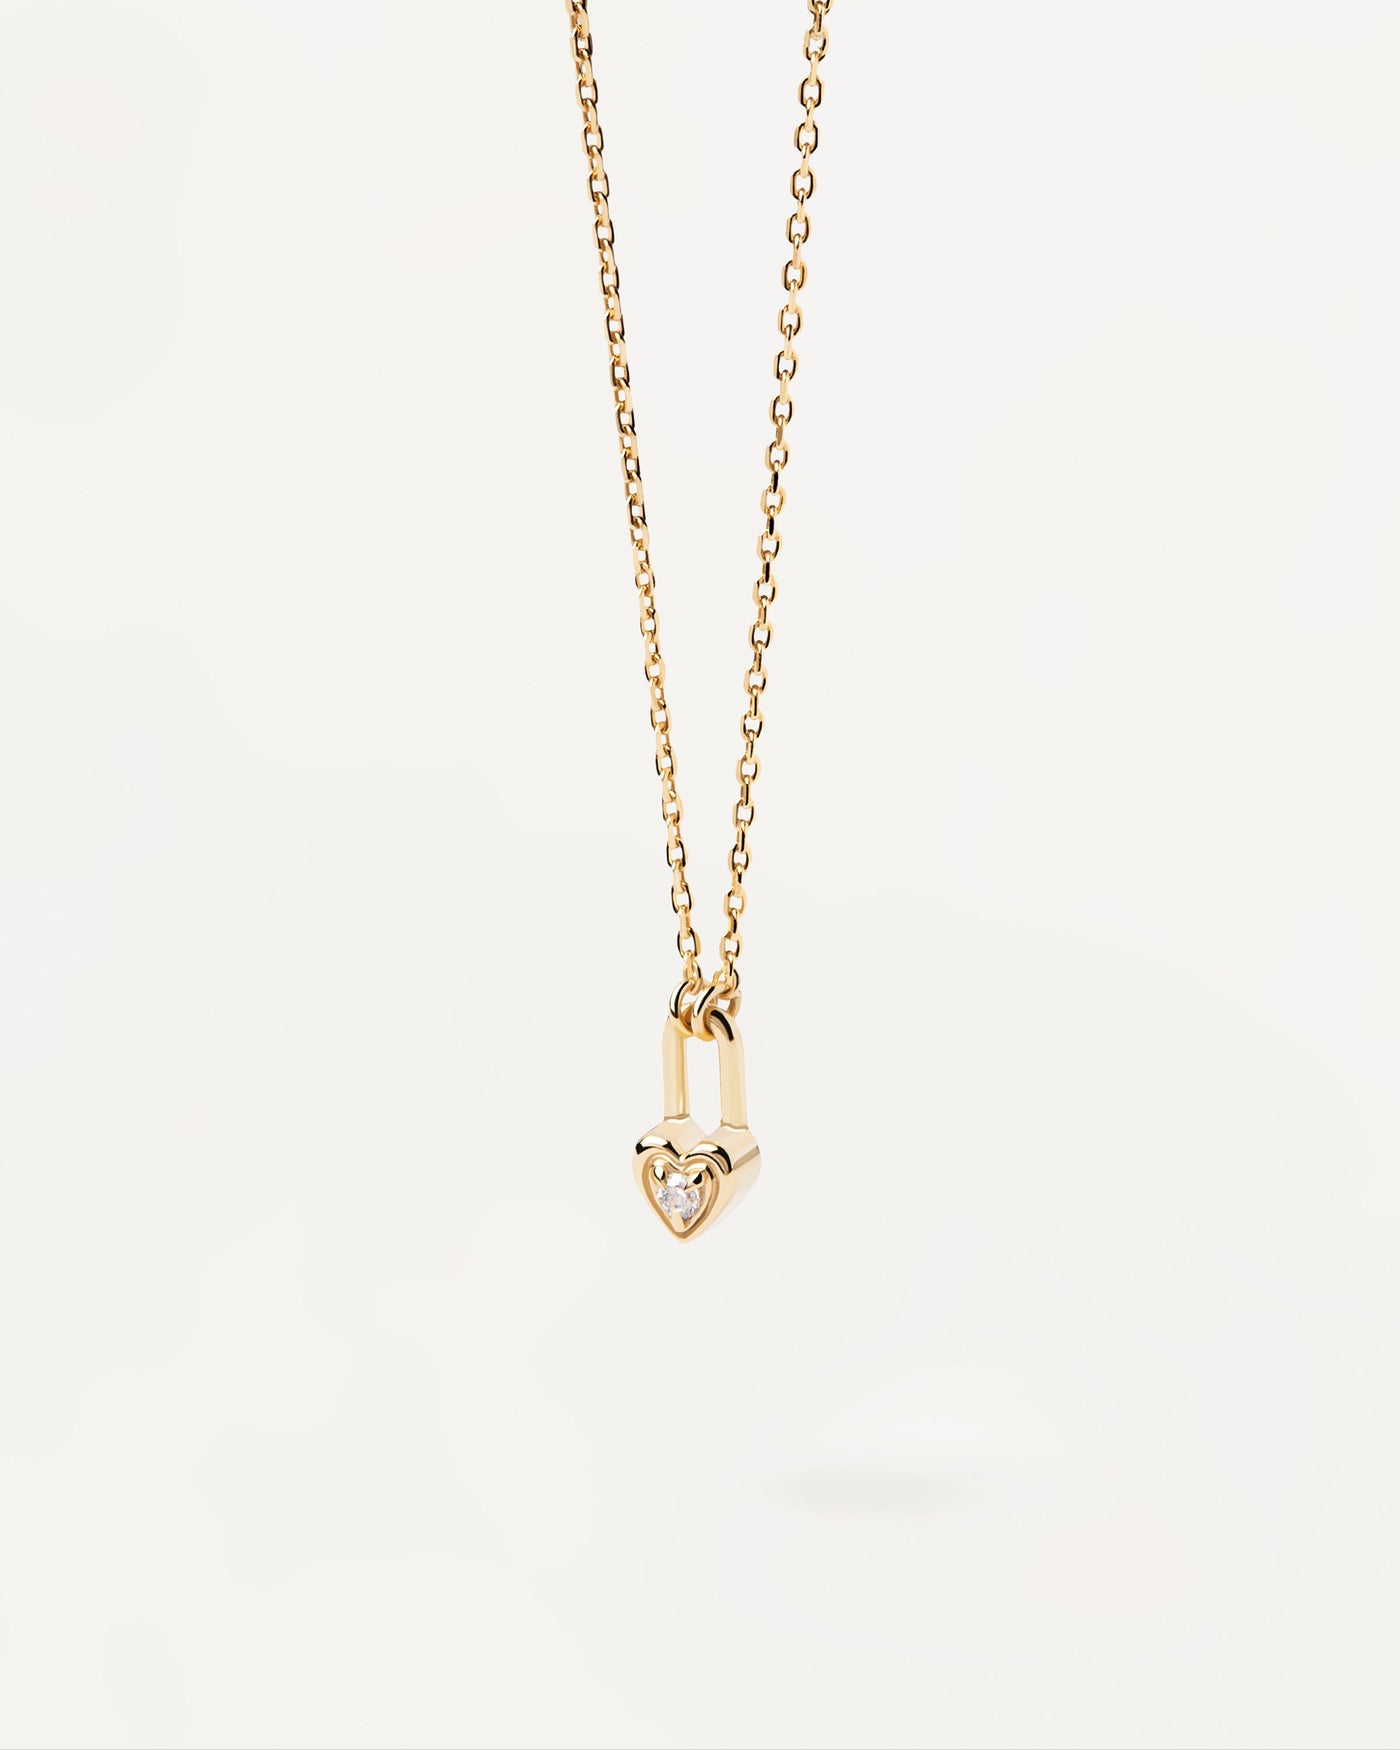 2023 Selection | Heart Padlock Necklace. Gold-plated necklace with heart padlock pendant set with white zirconia. Get the latest arrival from PDPAOLA. Place your order safely and get this Best Seller. Free Shipping.